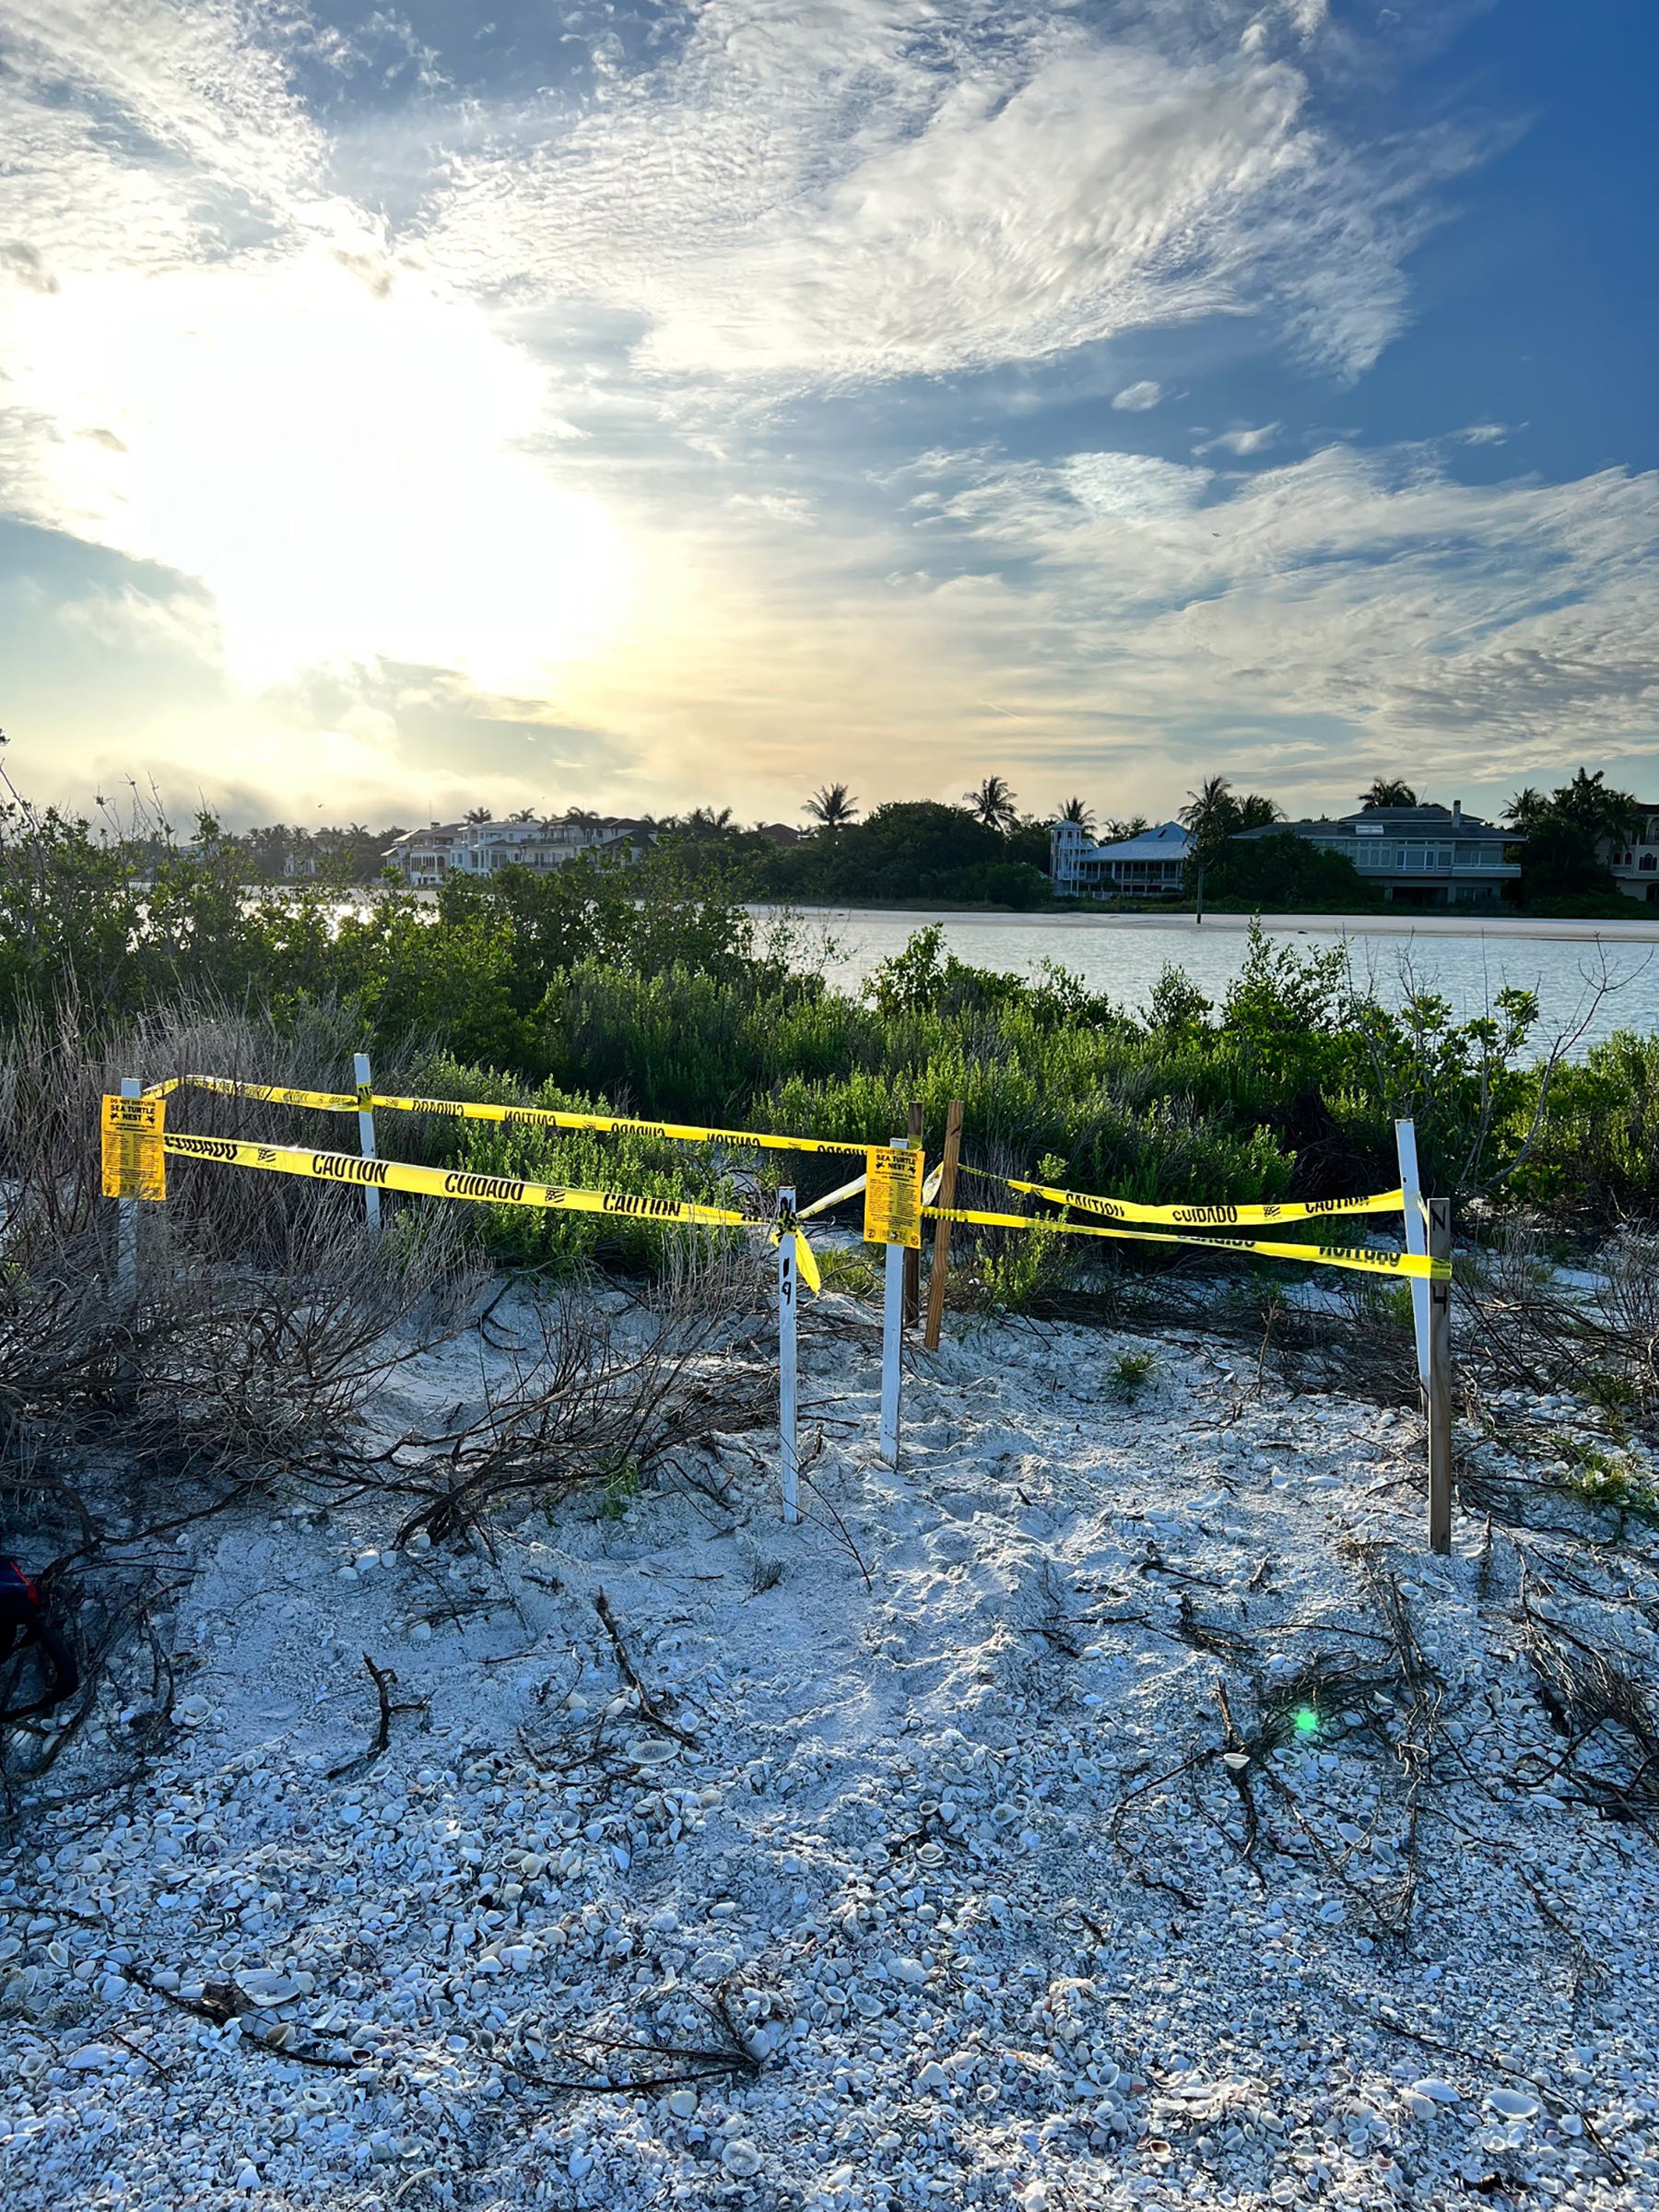 Those that monitor sea turtles in Southwest Florida mark the nests with wooden posts and yellow tape. Here on Marco Island and on Bonita Beach there are no predators so they don’t need to put protective cages around the nest, but in other areas such as Keewaydin and Sanibel and Captiva, they need to put the protection around the nests to keep predators away.